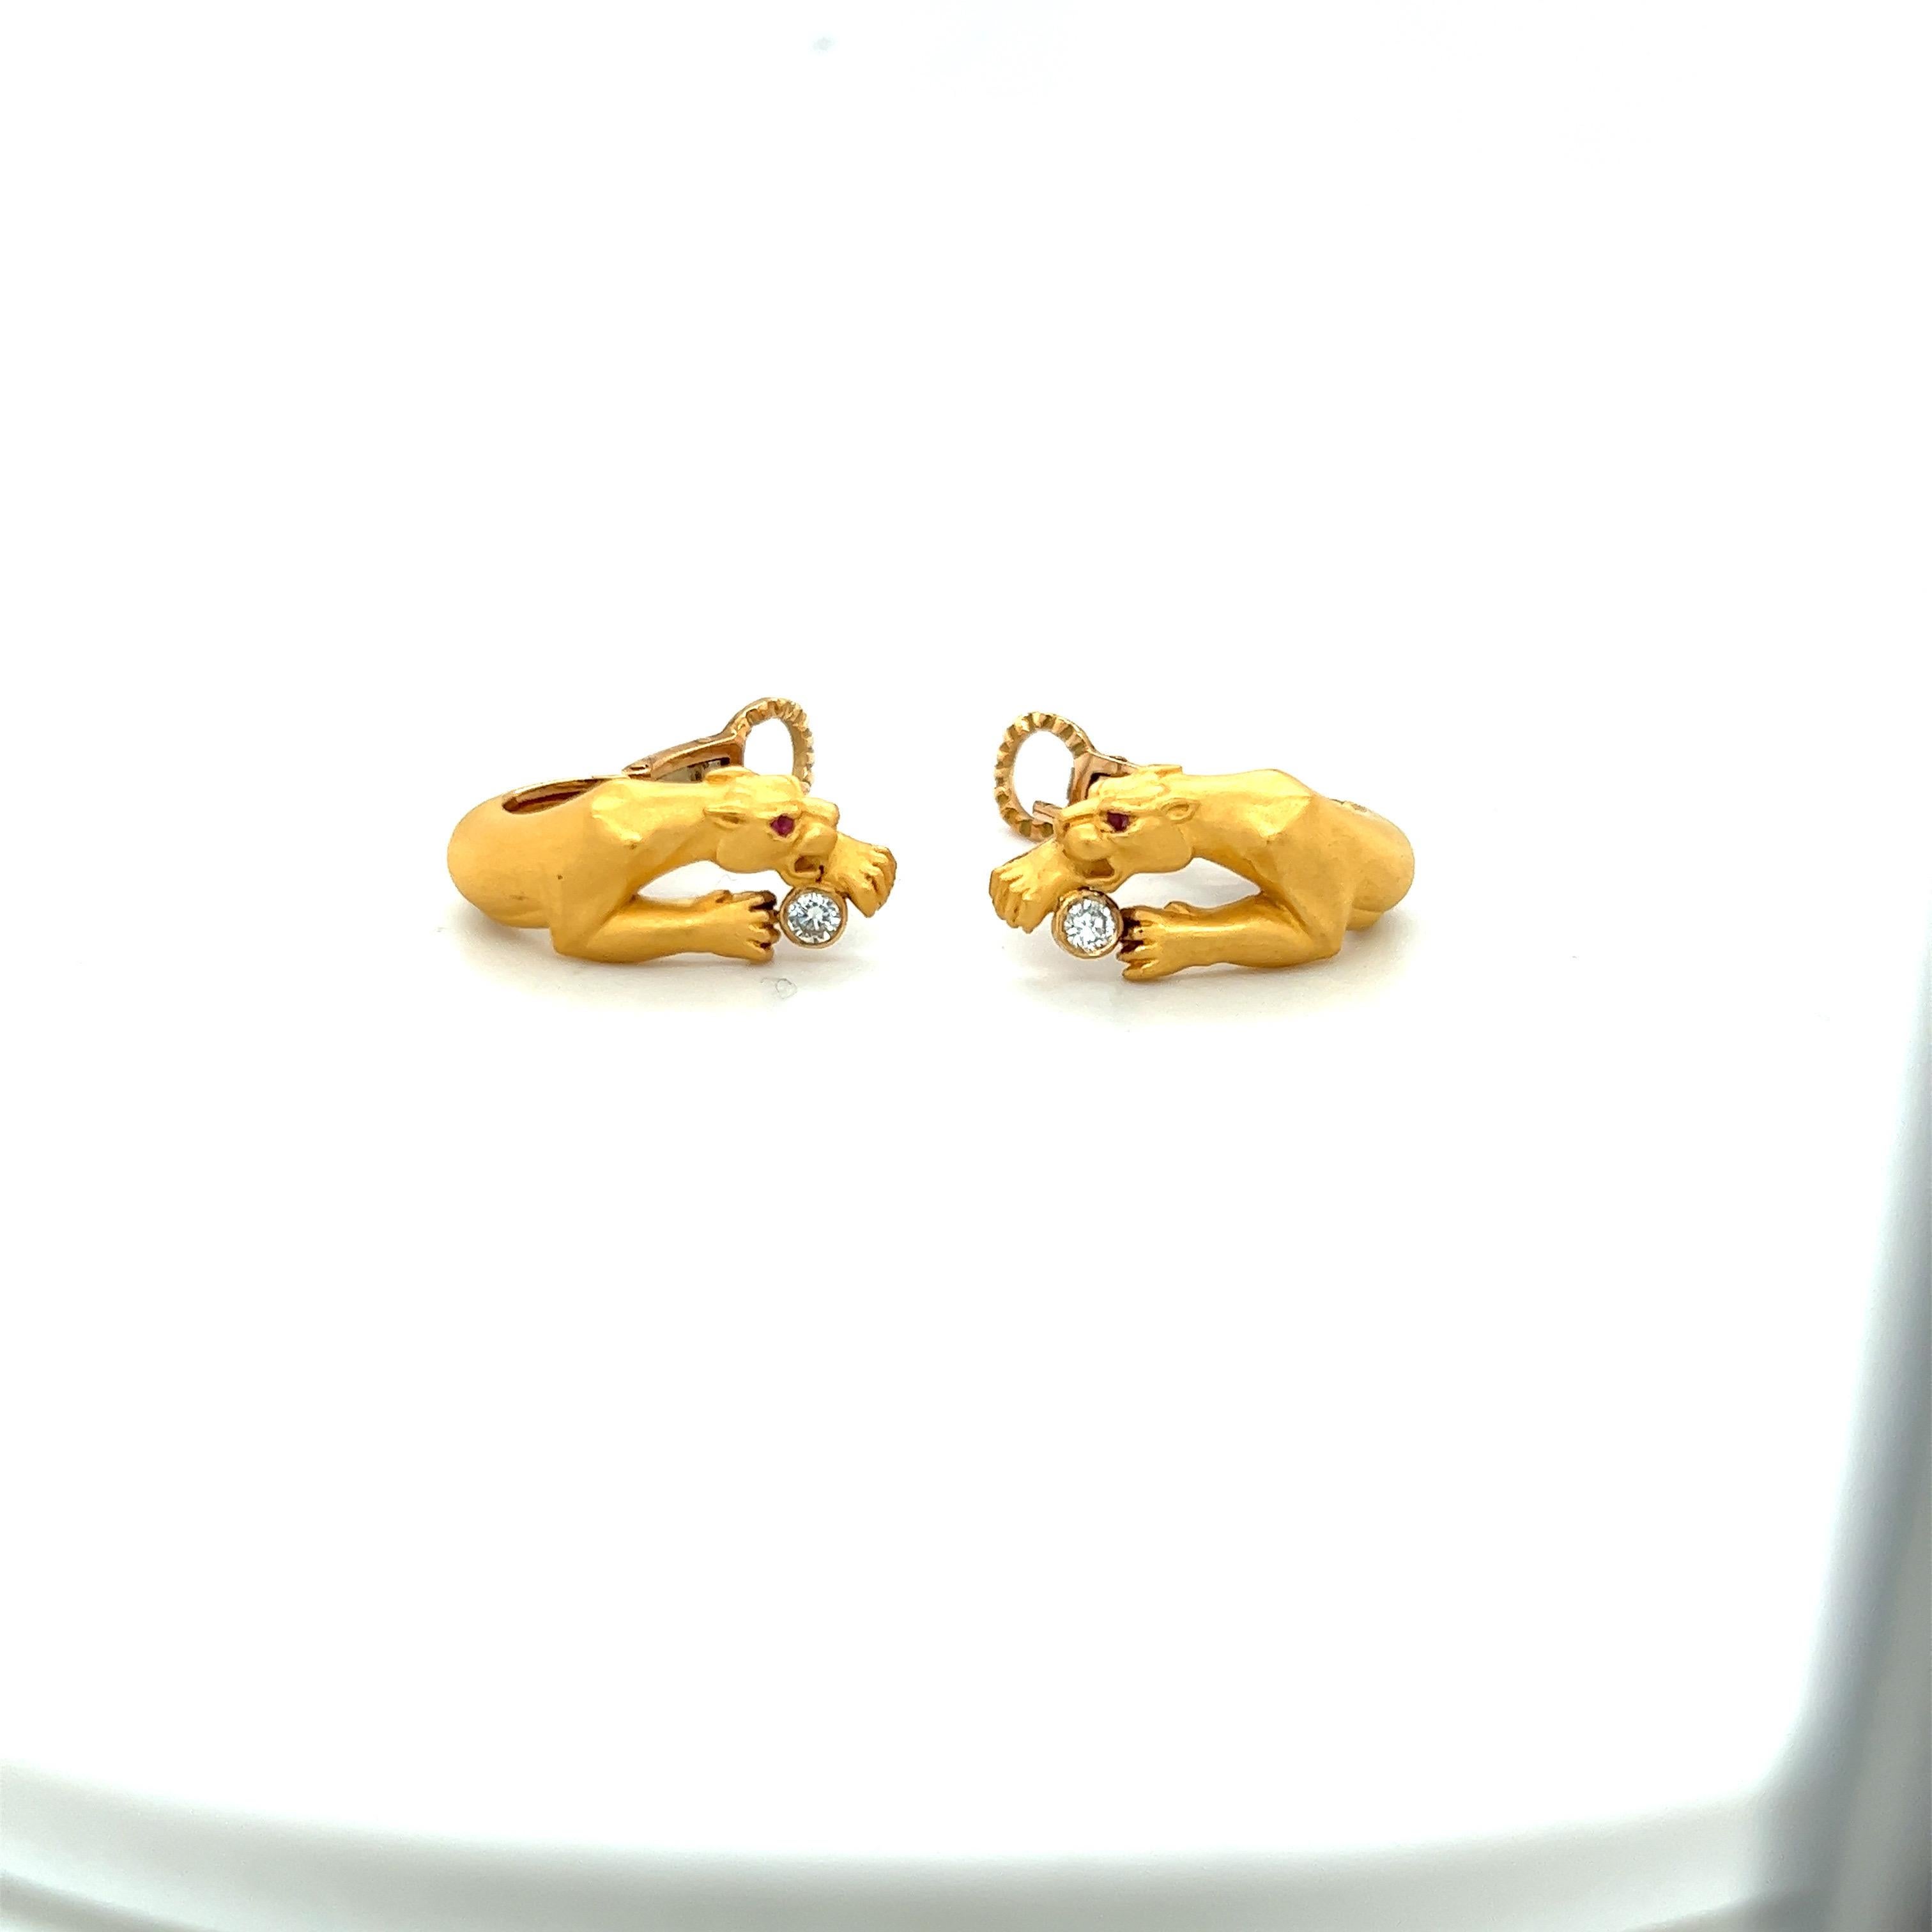 Contemporary Carrera Y Carrera 18KT Yellow Gold Panther Earrings with 0.18Cts. Diamonds